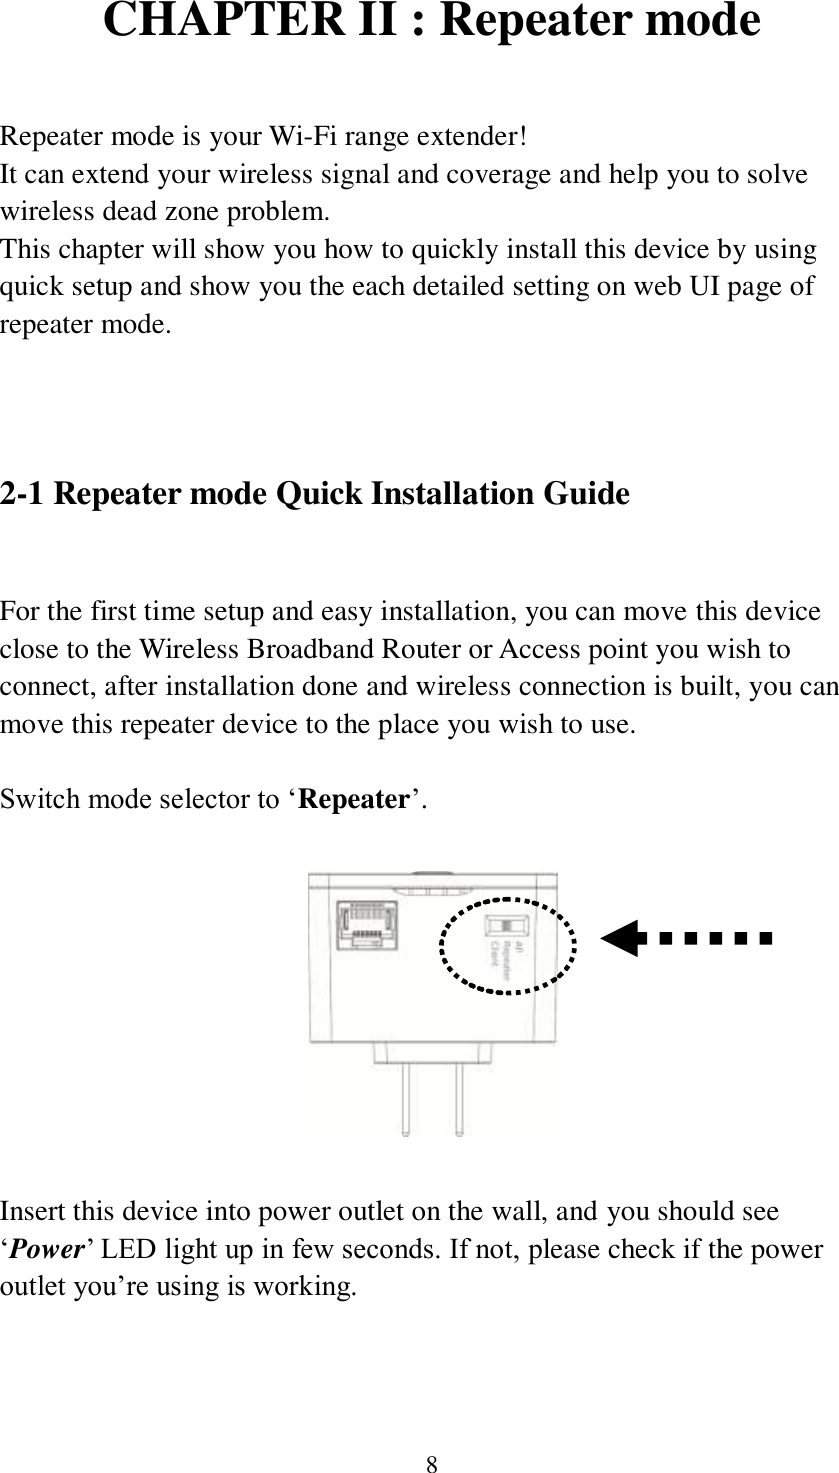 8 CHAPTER II : Repeater mode  Repeater mode is your Wi-Fi range extender! It can extend your wireless signal and coverage and help you to solve wireless dead zone problem.   This chapter will show you how to quickly install this device by using quick setup and show you the each detailed setting on web UI page of repeater mode.      2-1 Repeater mode Quick Installation Guide  For the first time setup and easy installation, you can move this device close to the Wireless Broadband Router or Access point you wish to connect, after installation done and wireless connection is built, you can move this repeater device to the place you wish to use.  Switch mode selector to ‘Repeater’.    Insert this device into power outlet on the wall, and you should see ‘Power’ LED light up in few seconds. If not, please check if the power outlet you’re using is working.  